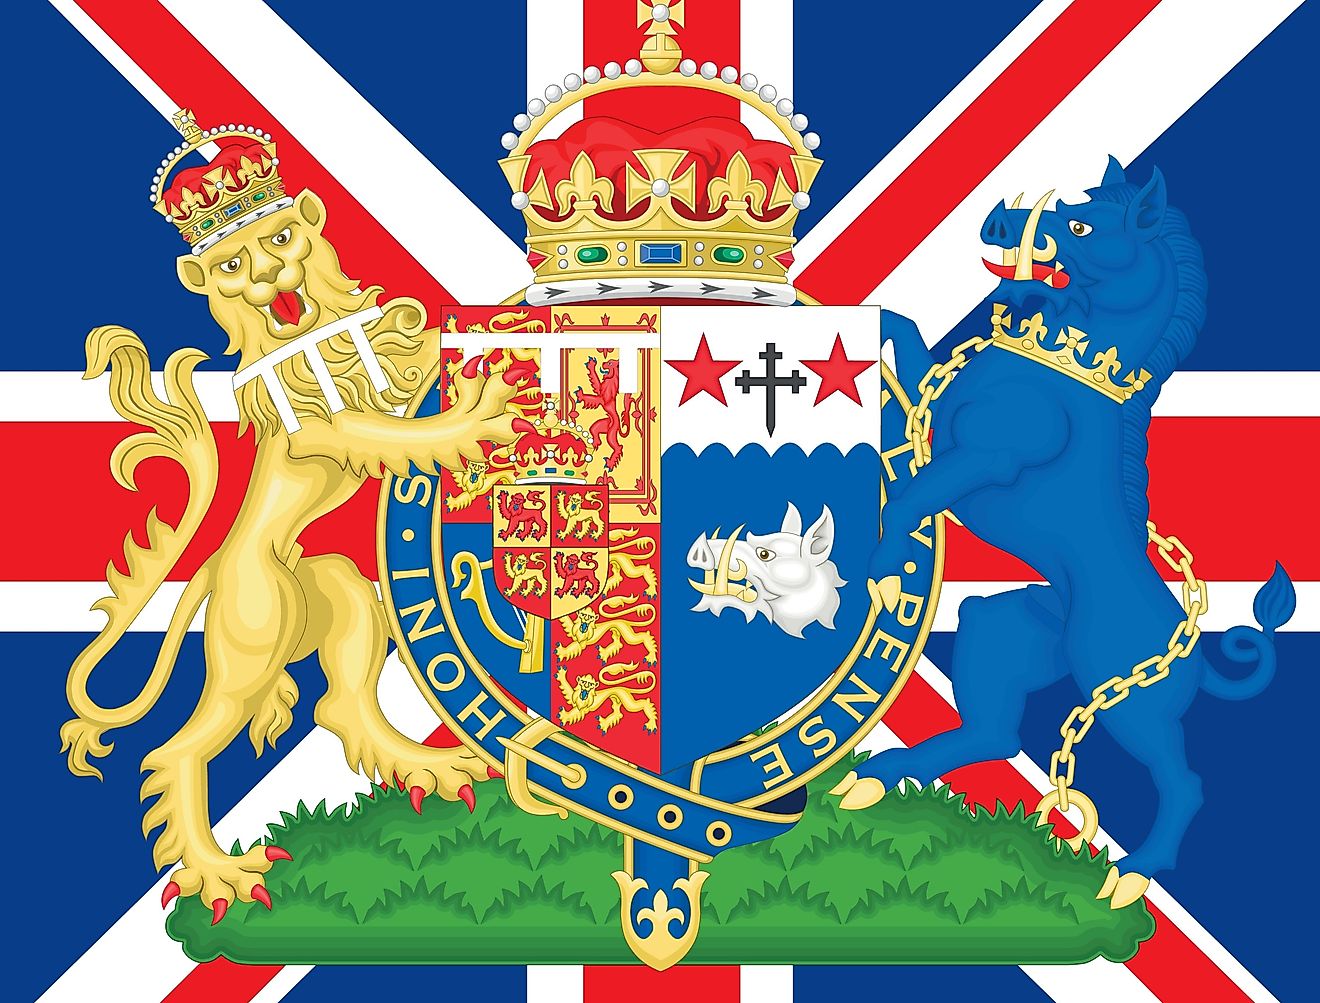 Camilla coat of arms on the United Kingdom flag, Queen Consort of the King Charles Third, 2022. Image credit Fabrizio Annovi via Shutterstock